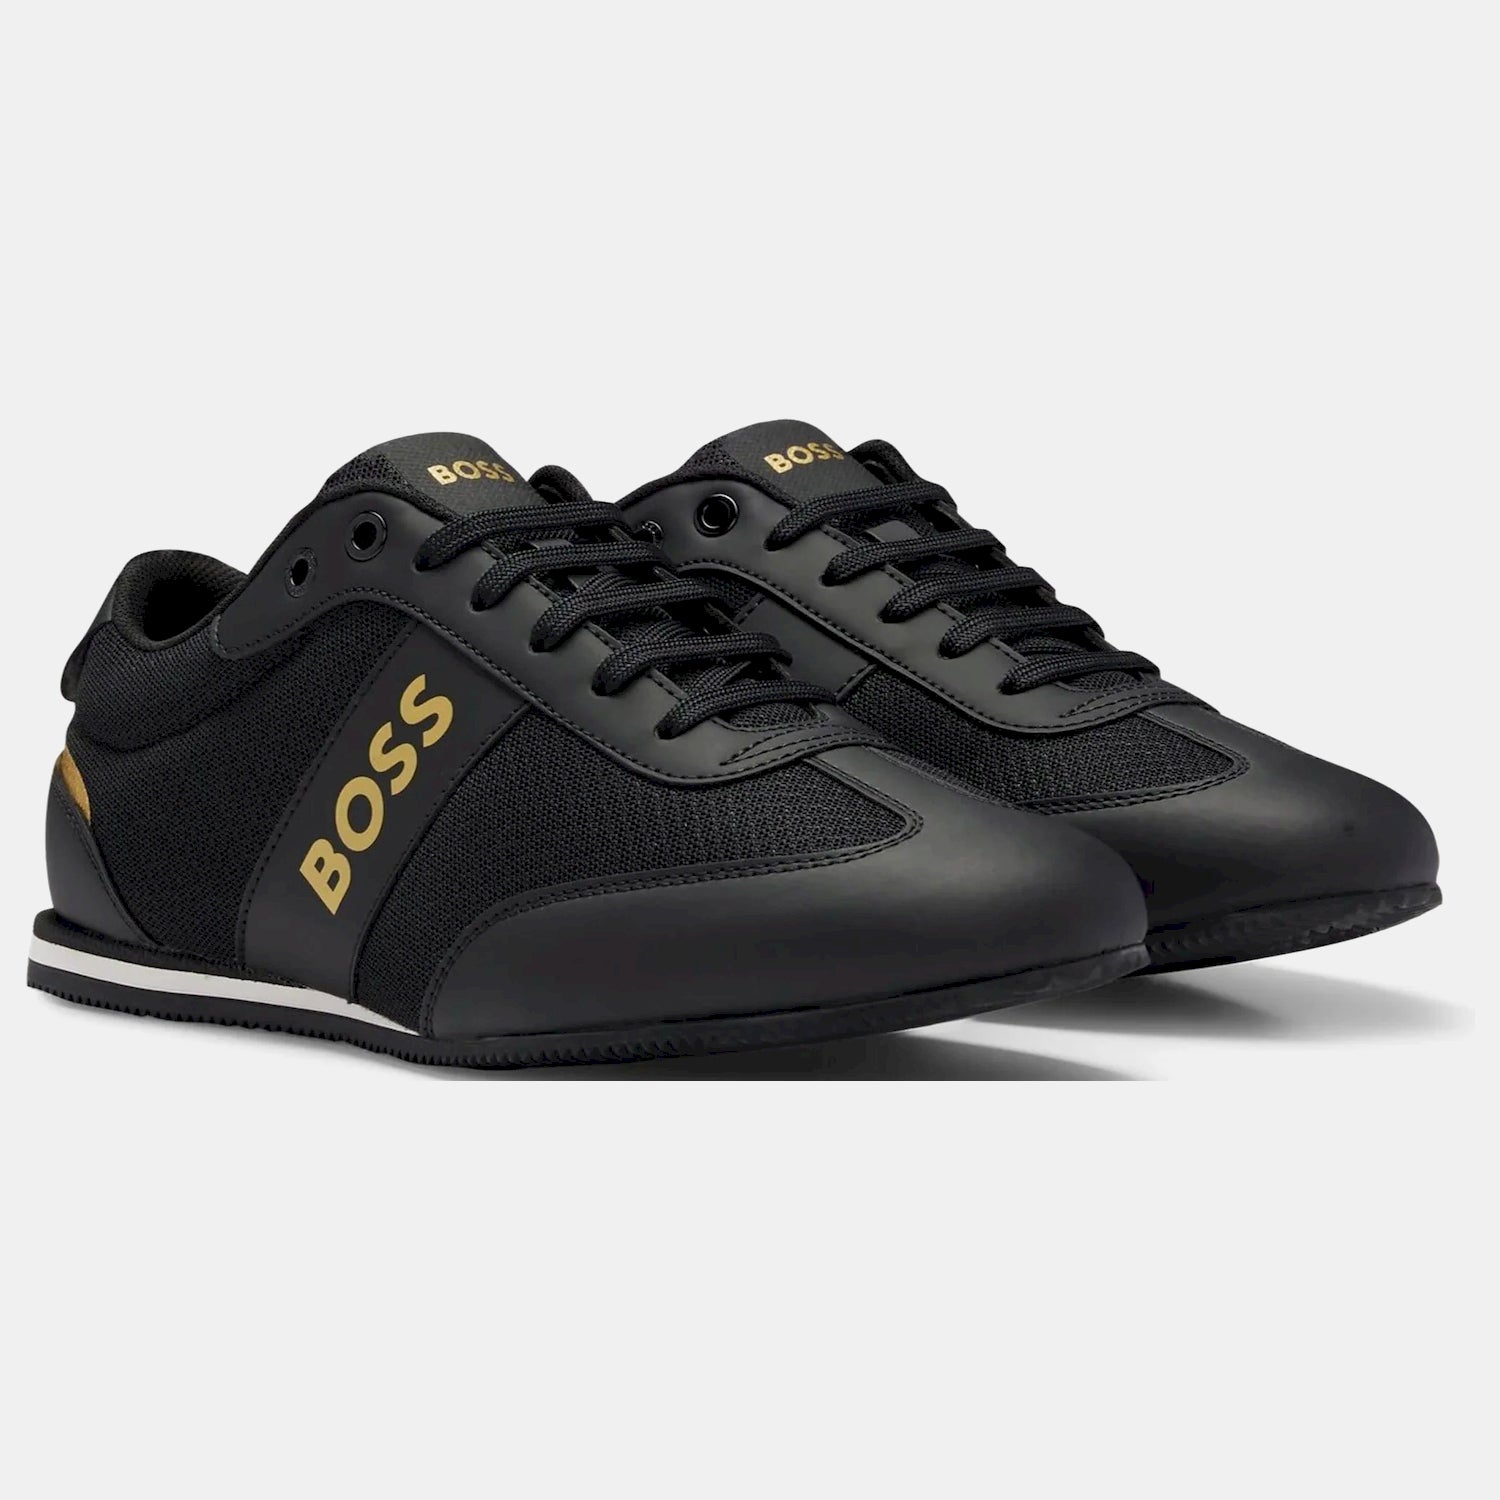 Boss Sapatilhas Sneakers Shoes Rusham Lowp Mx Blk Gold Preto Ouro_shot4